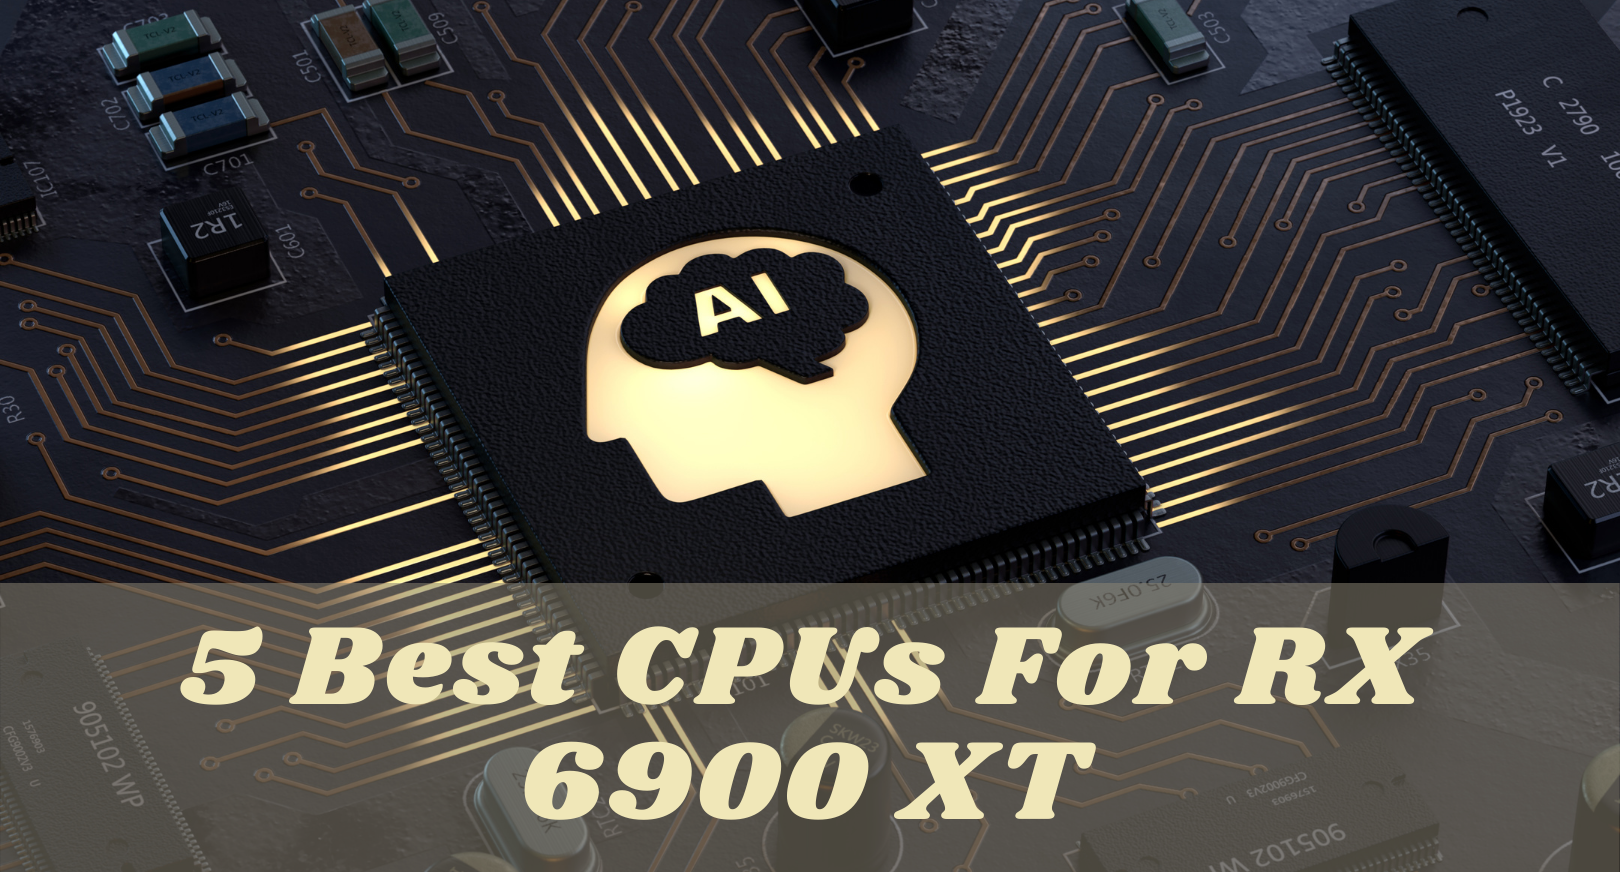 5 Best CPUs For RX 6900 XT